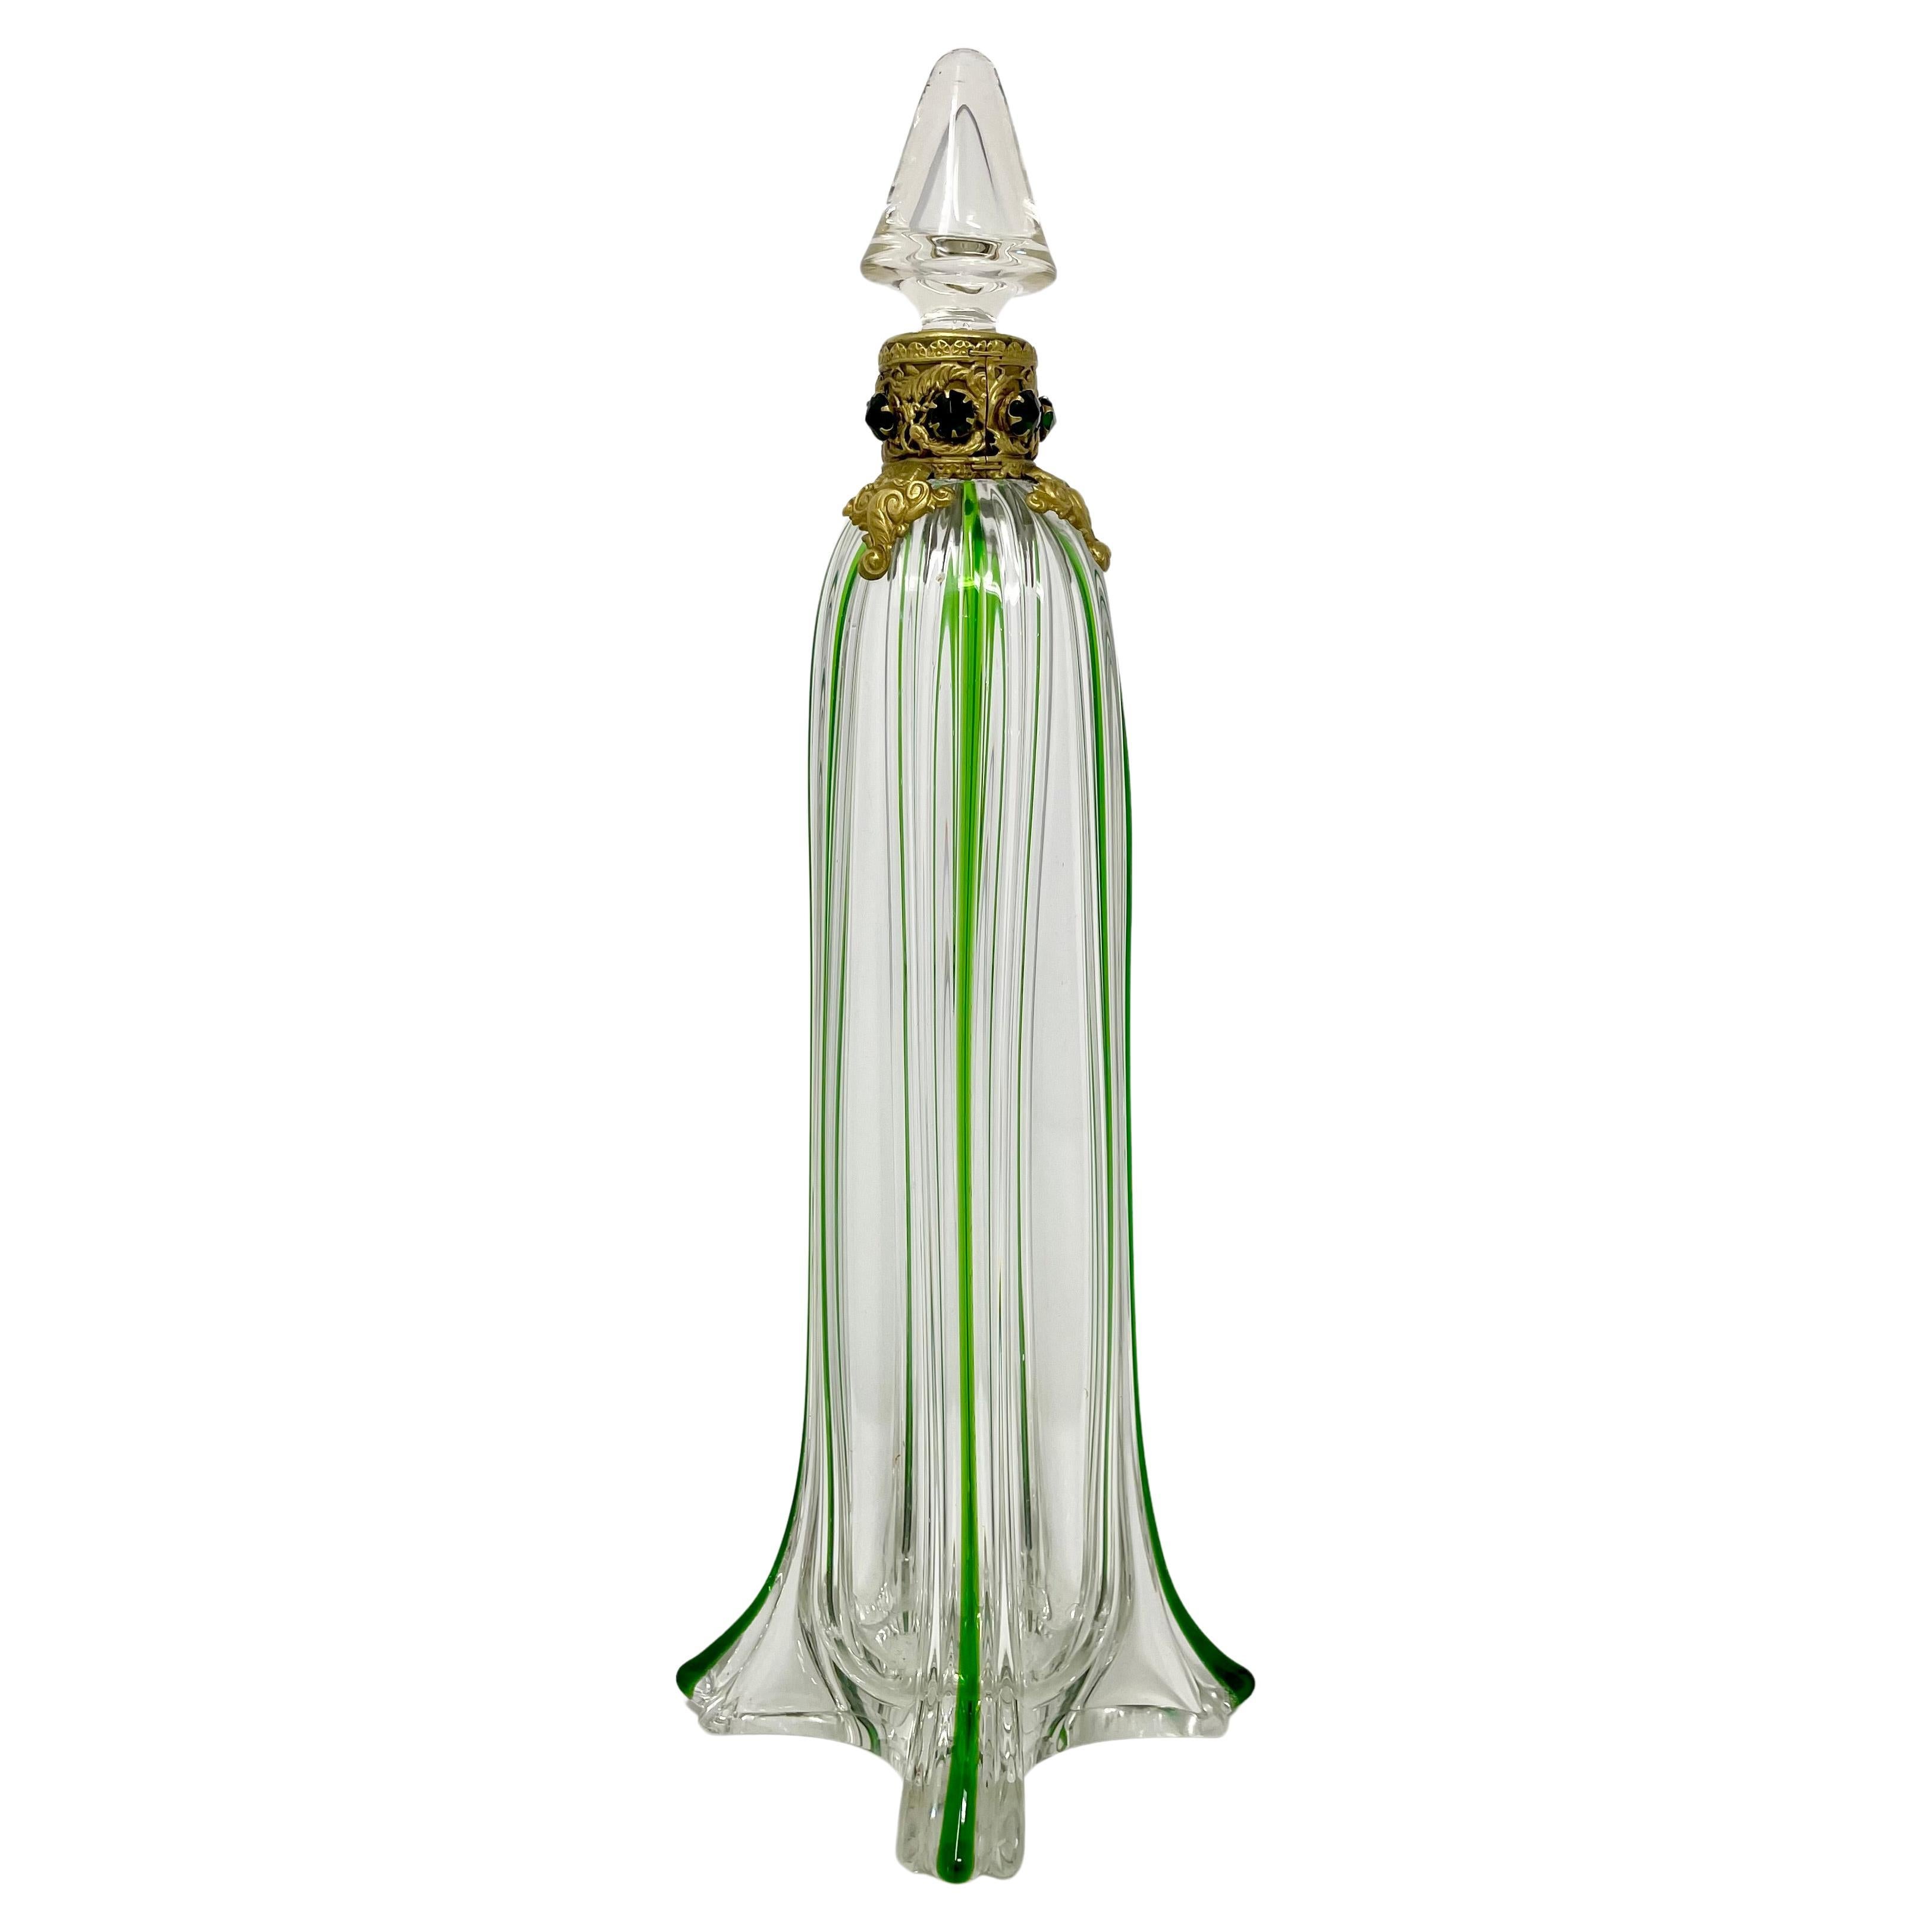 Antique Gold Bronze Mounted Green & Clear Hand-Blown Glass Scent Bottle, Circa 1890-1910.